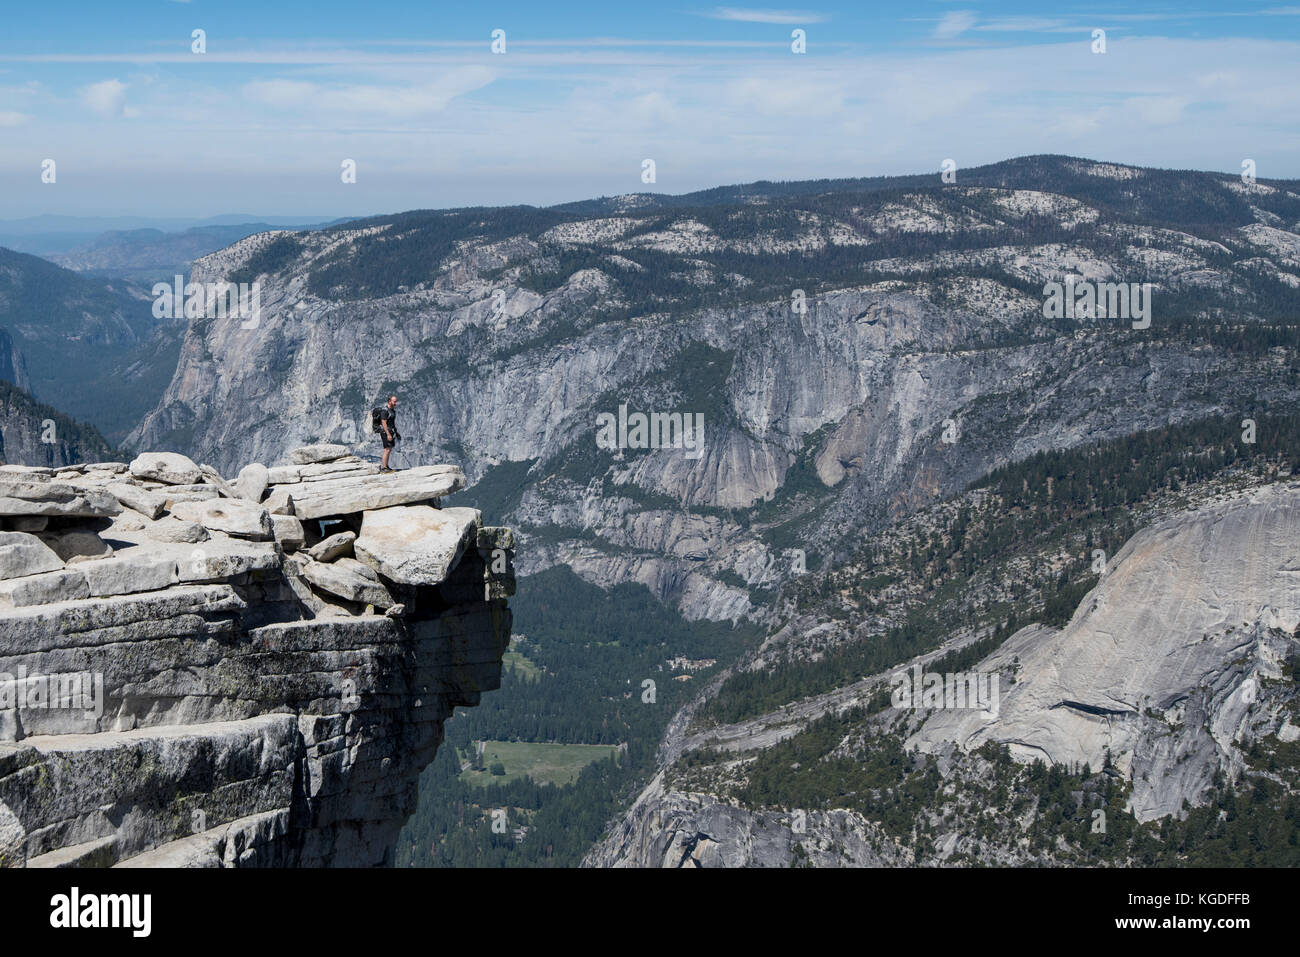 A man stands triumphantly on top of Half Dome with Yosemite Valley in the background in Yosemite National Park. Stock Photo